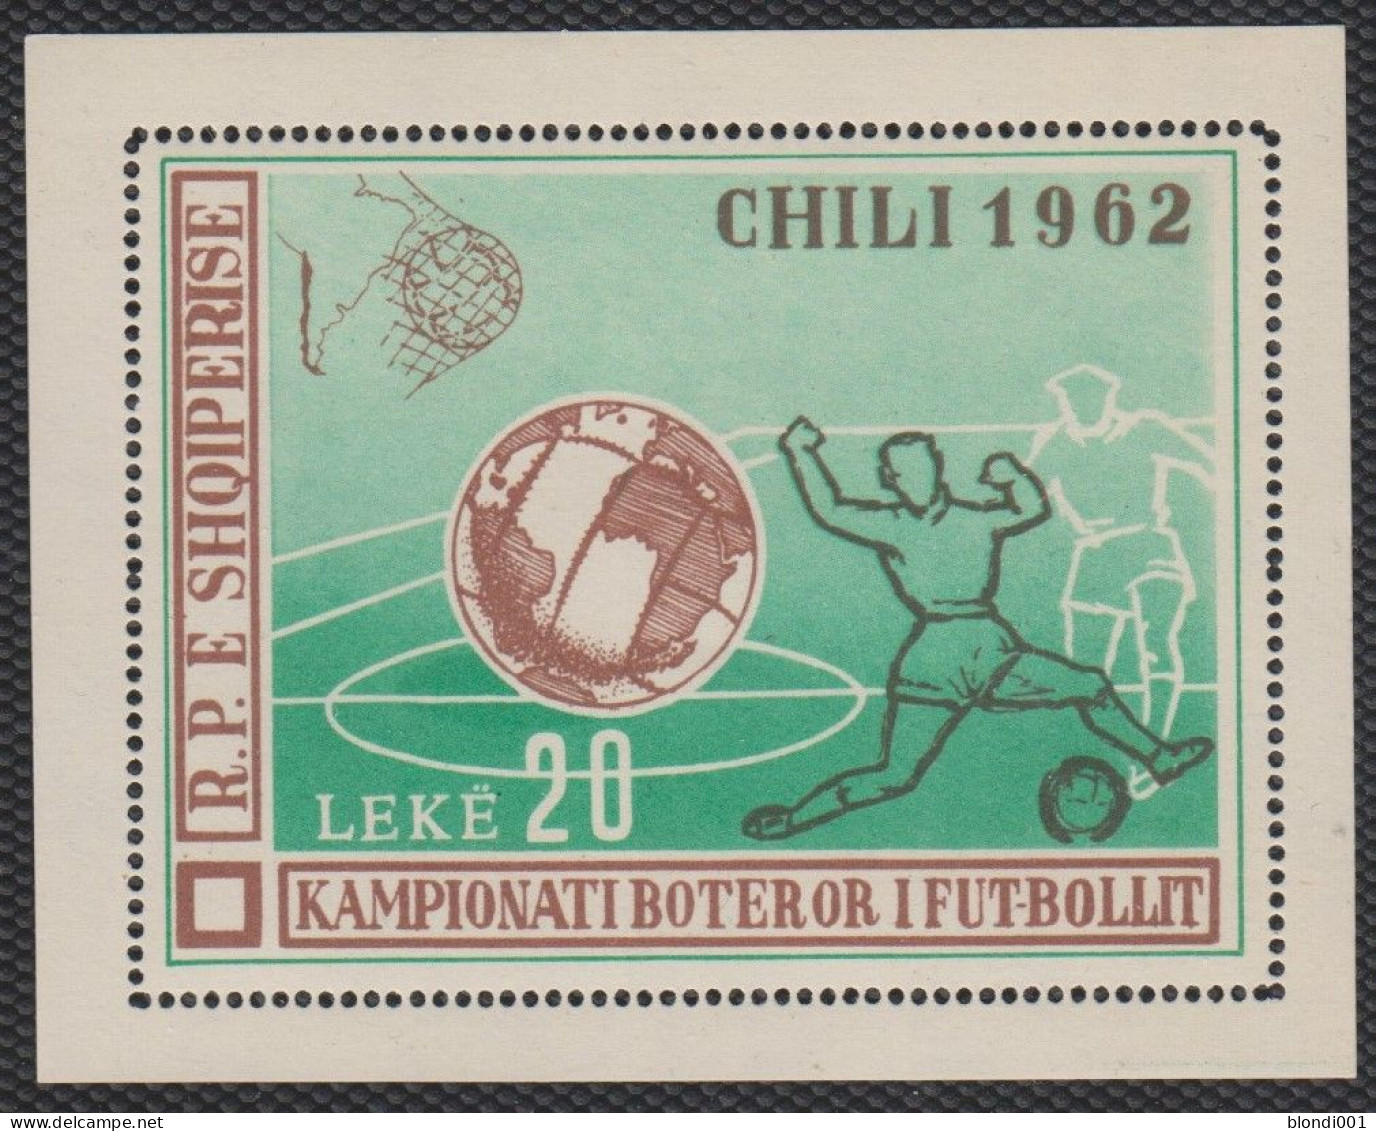 Soccer World Cup 1962 - Football - ALBANIA - S/S Perf. MNH - 1962 – Chili